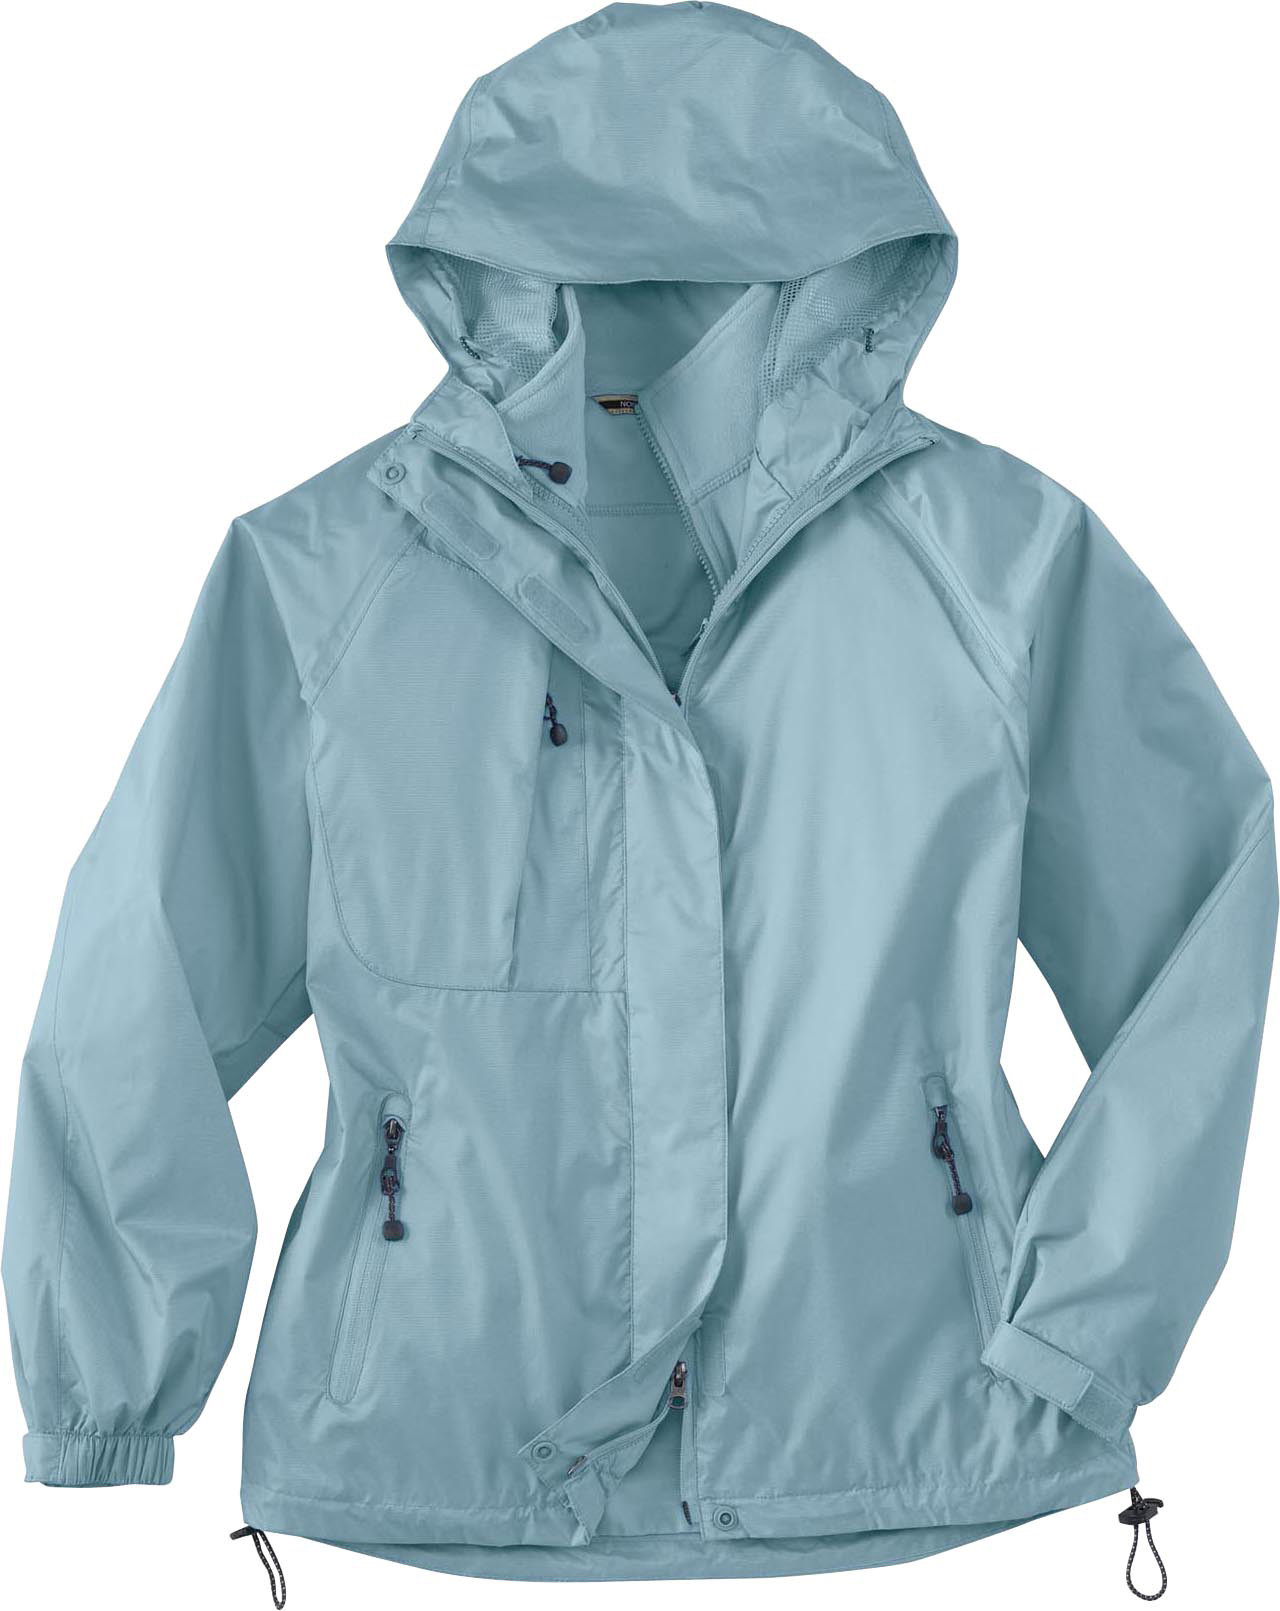 Ash City Performance Jackets 78046 - Ladies' 3-In-1 Techno Performance ...